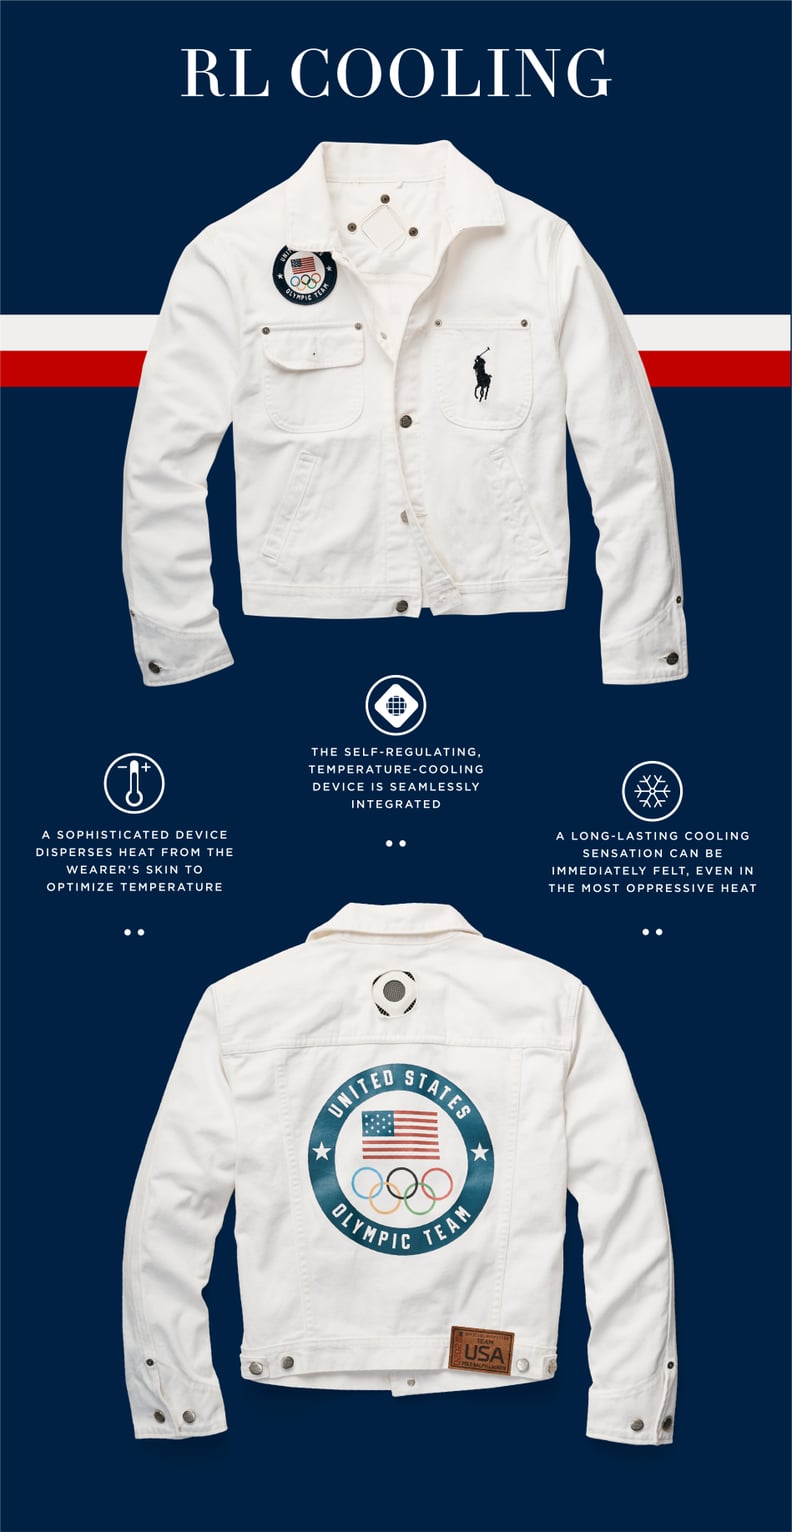 Team USA Opening Ceremony Outfit featuring RL Cooling Technology